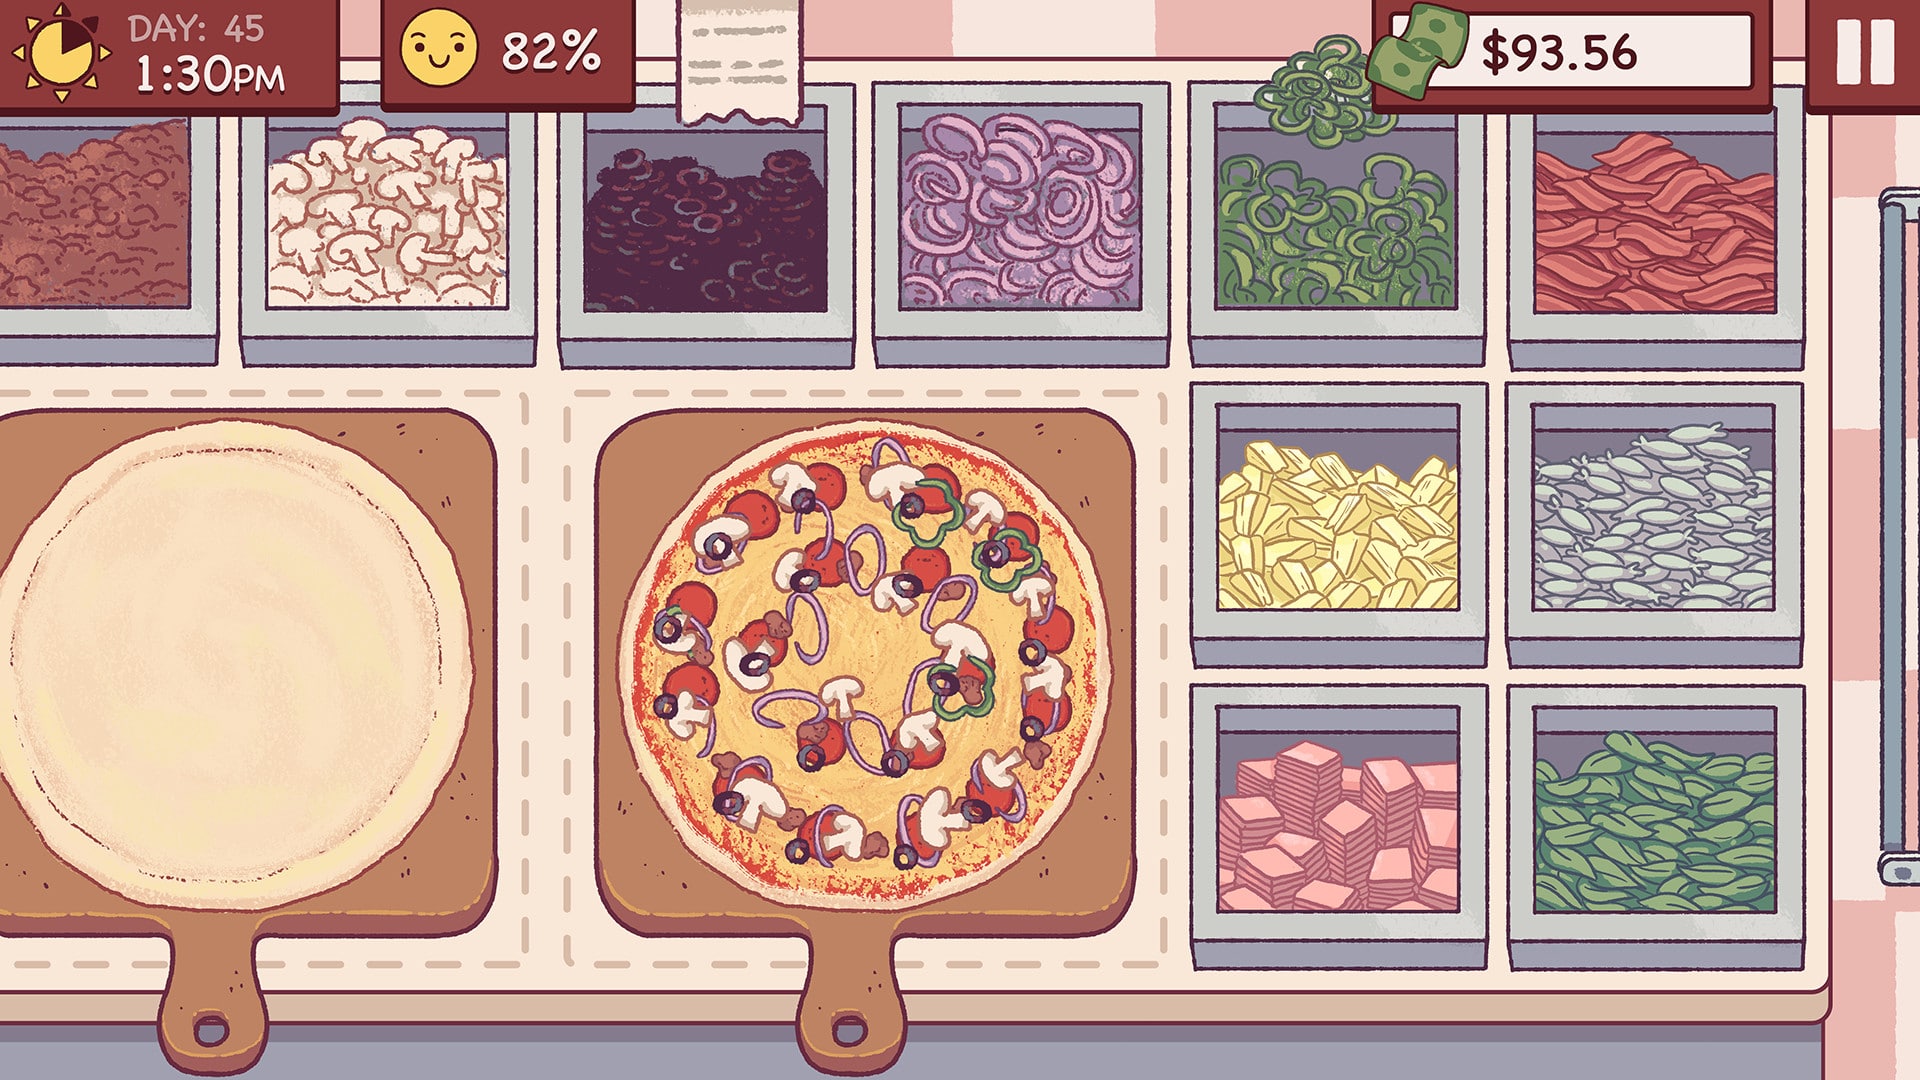 Good pizza great pizza - cooking simulator game cracker